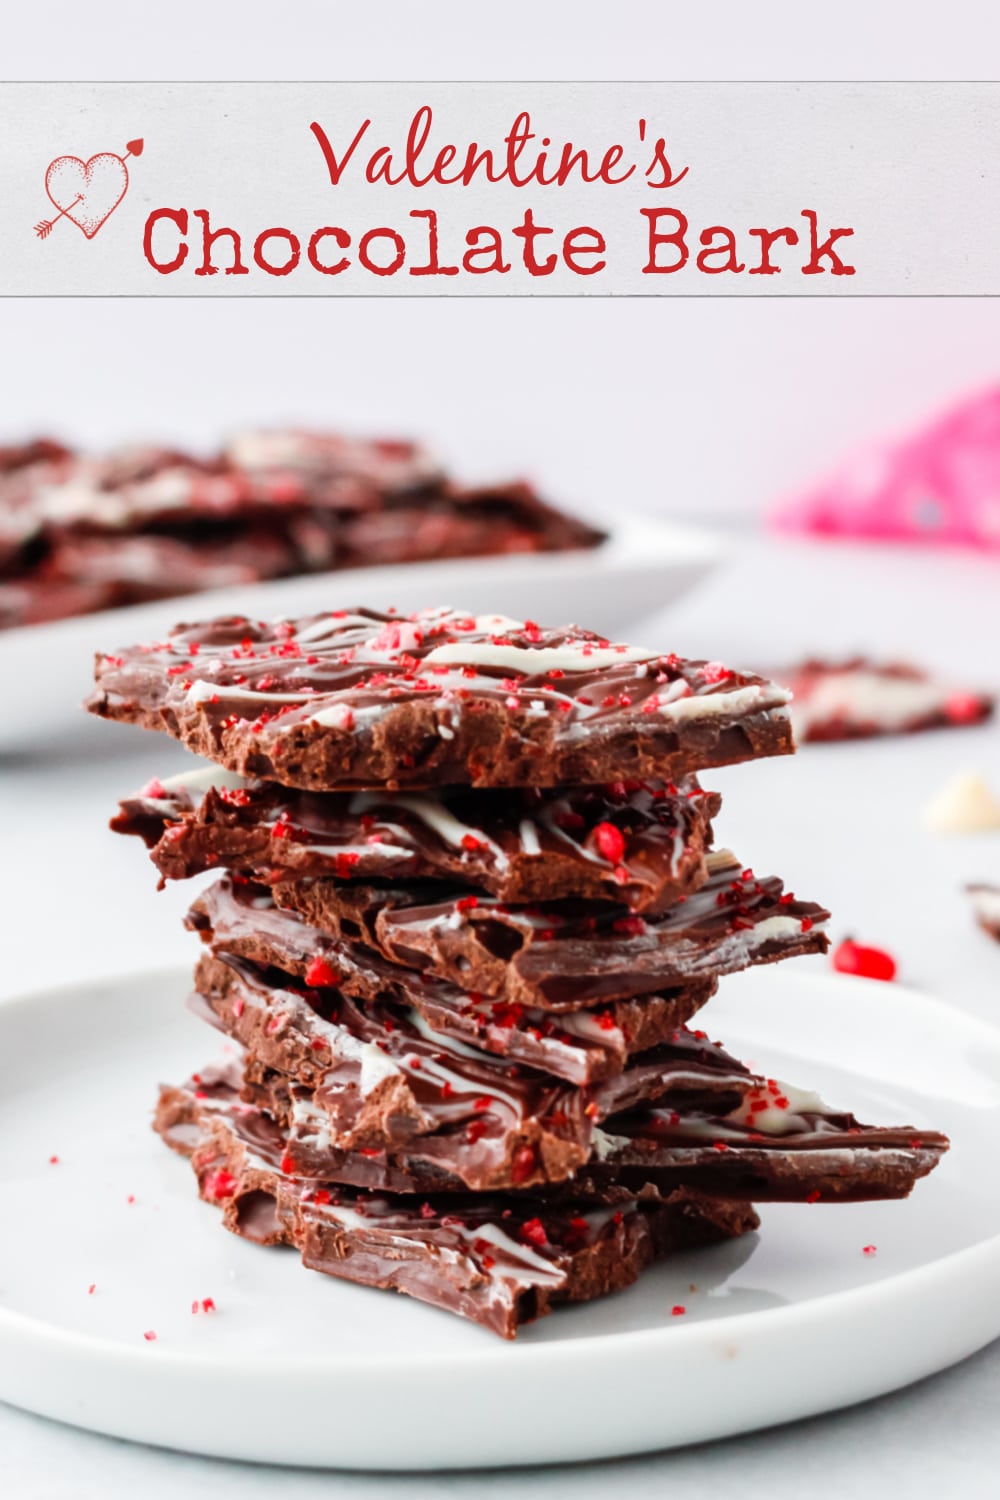 Melt their heart with an easy Valentine's Day treat for chocolate lovers - festive chocolate bark that's ready in fifteen minutes! via @cmpollak1